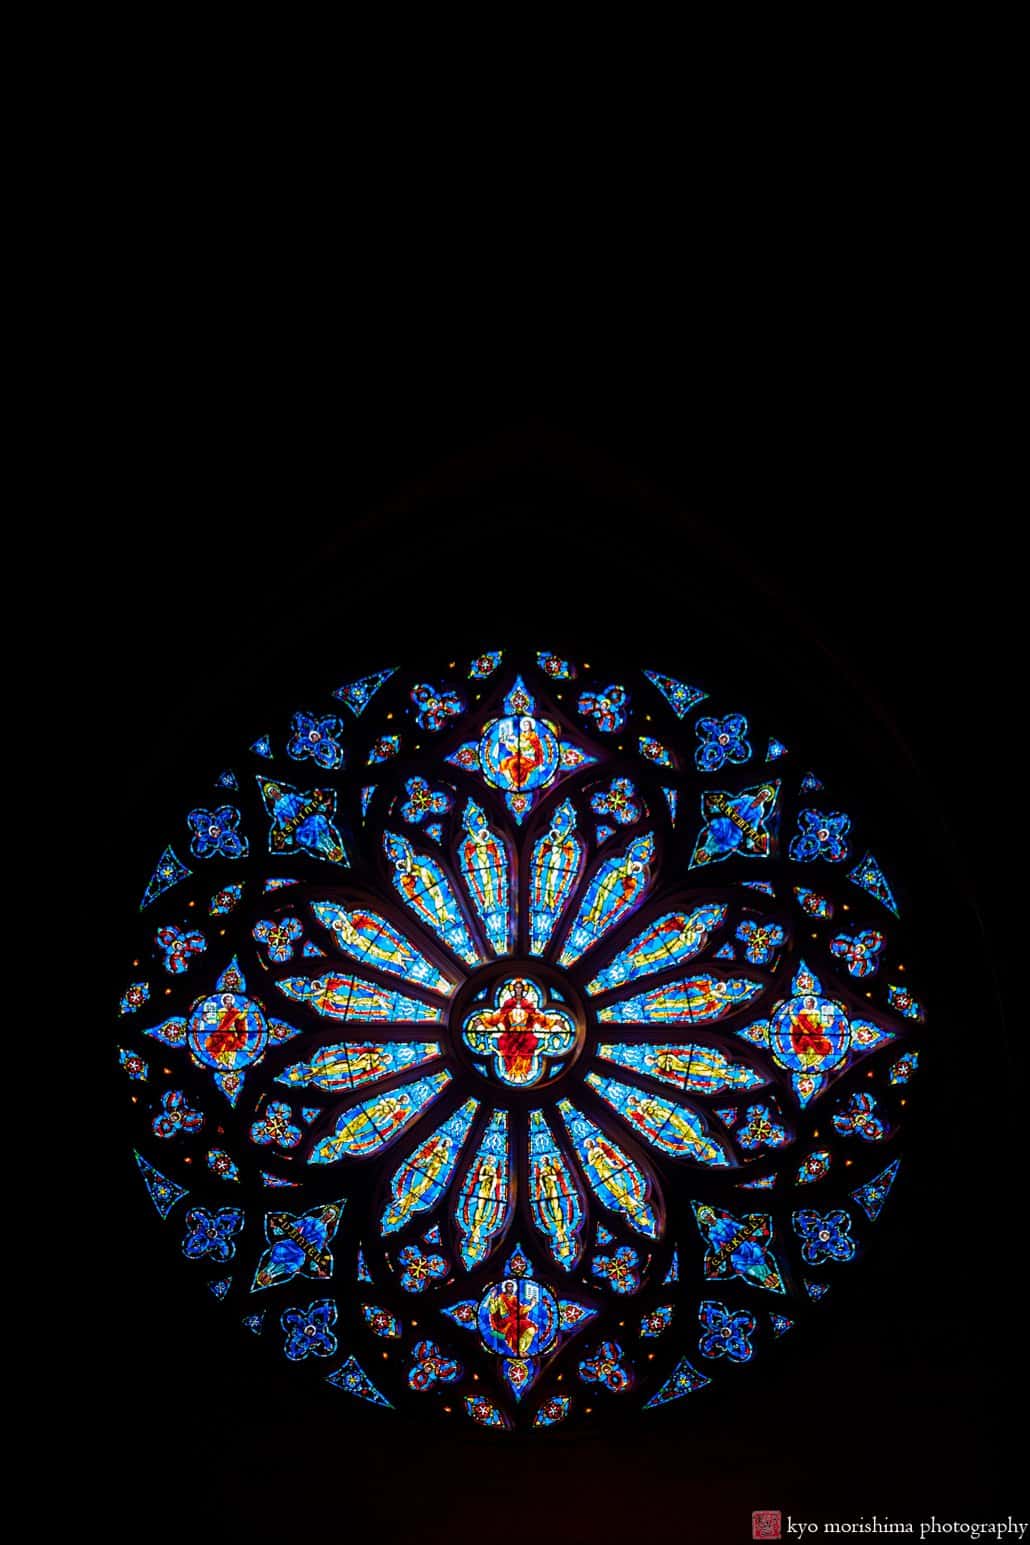 Stained glass window at St. John the Divine